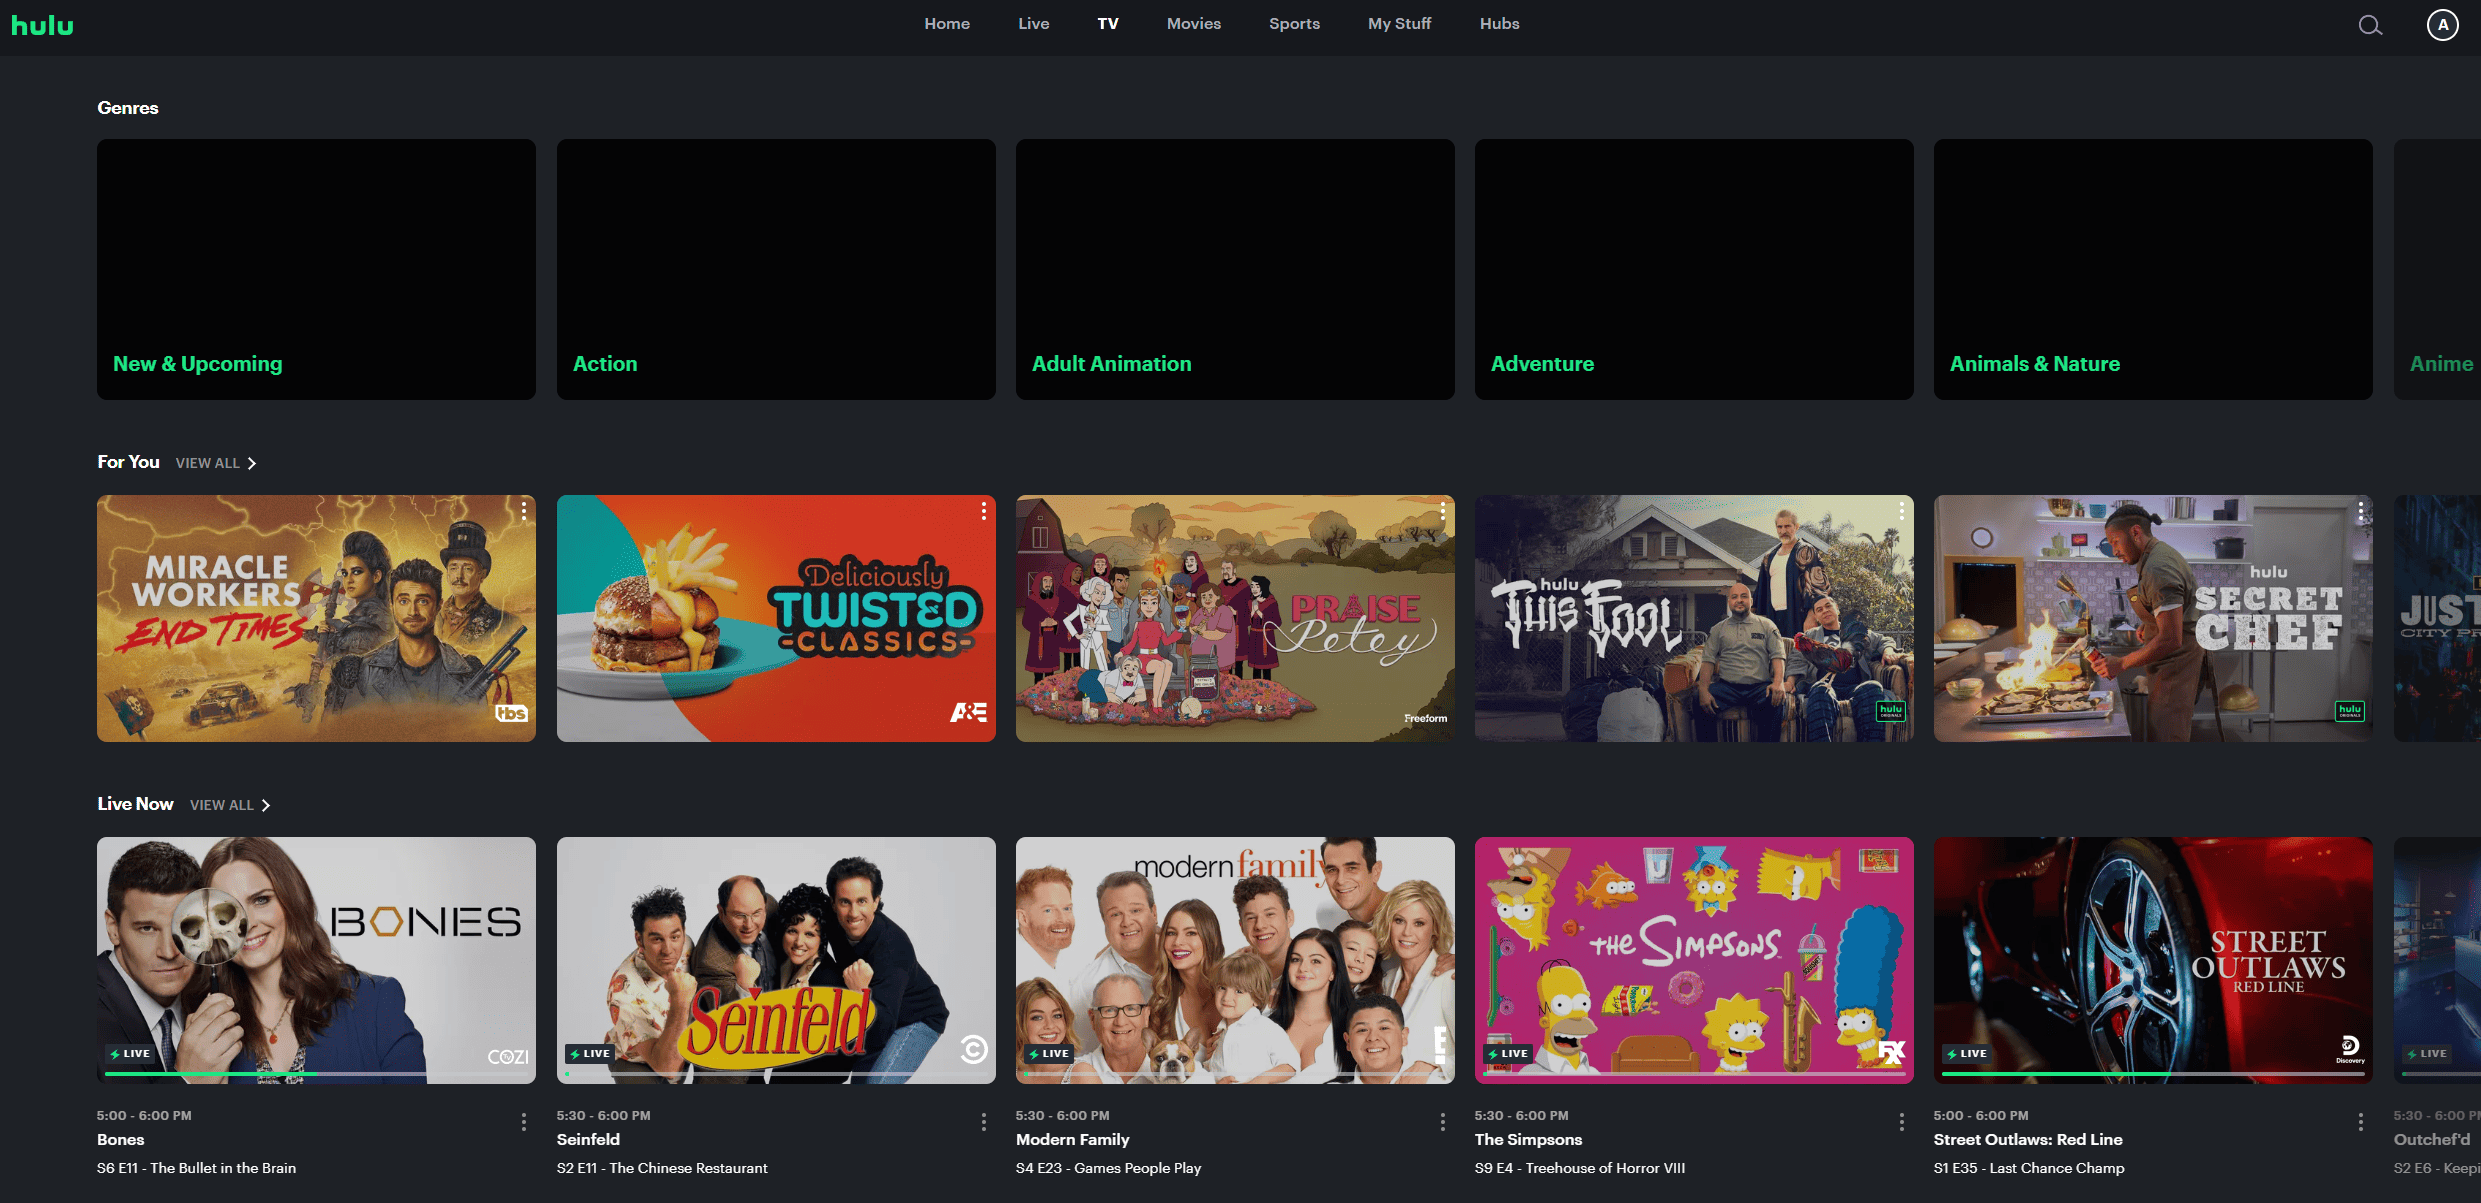 Screenshot of different TV shows under the “TV” tab on Hulu